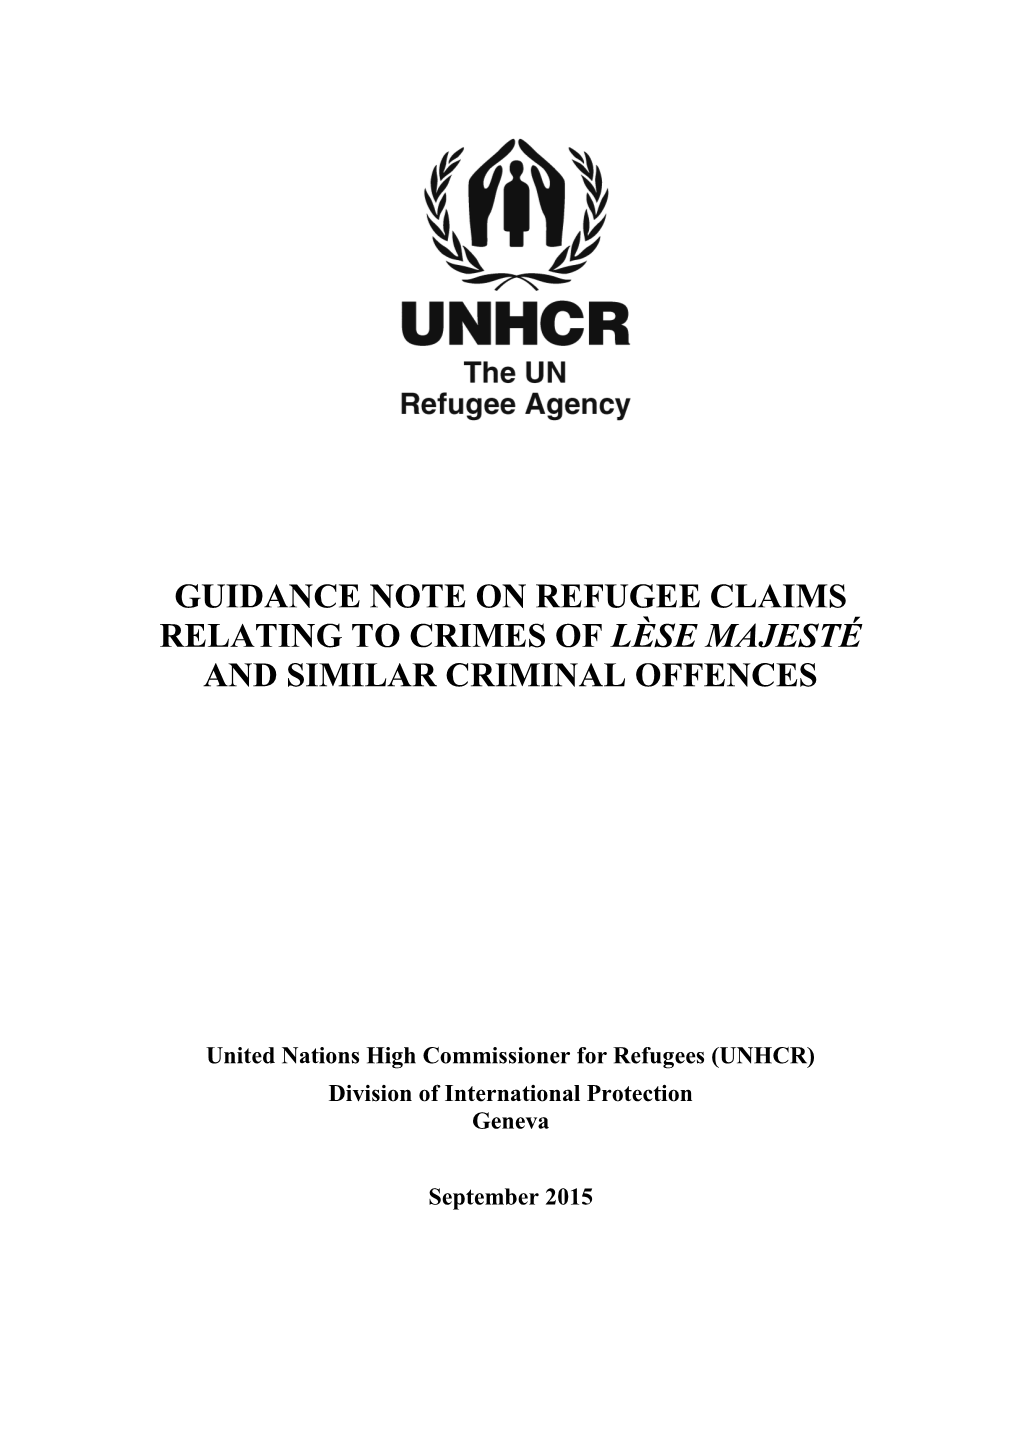 Guidance Note on Refugee Claims Relating to Crimes of Lèse Majesté and Similar Criminal Offences